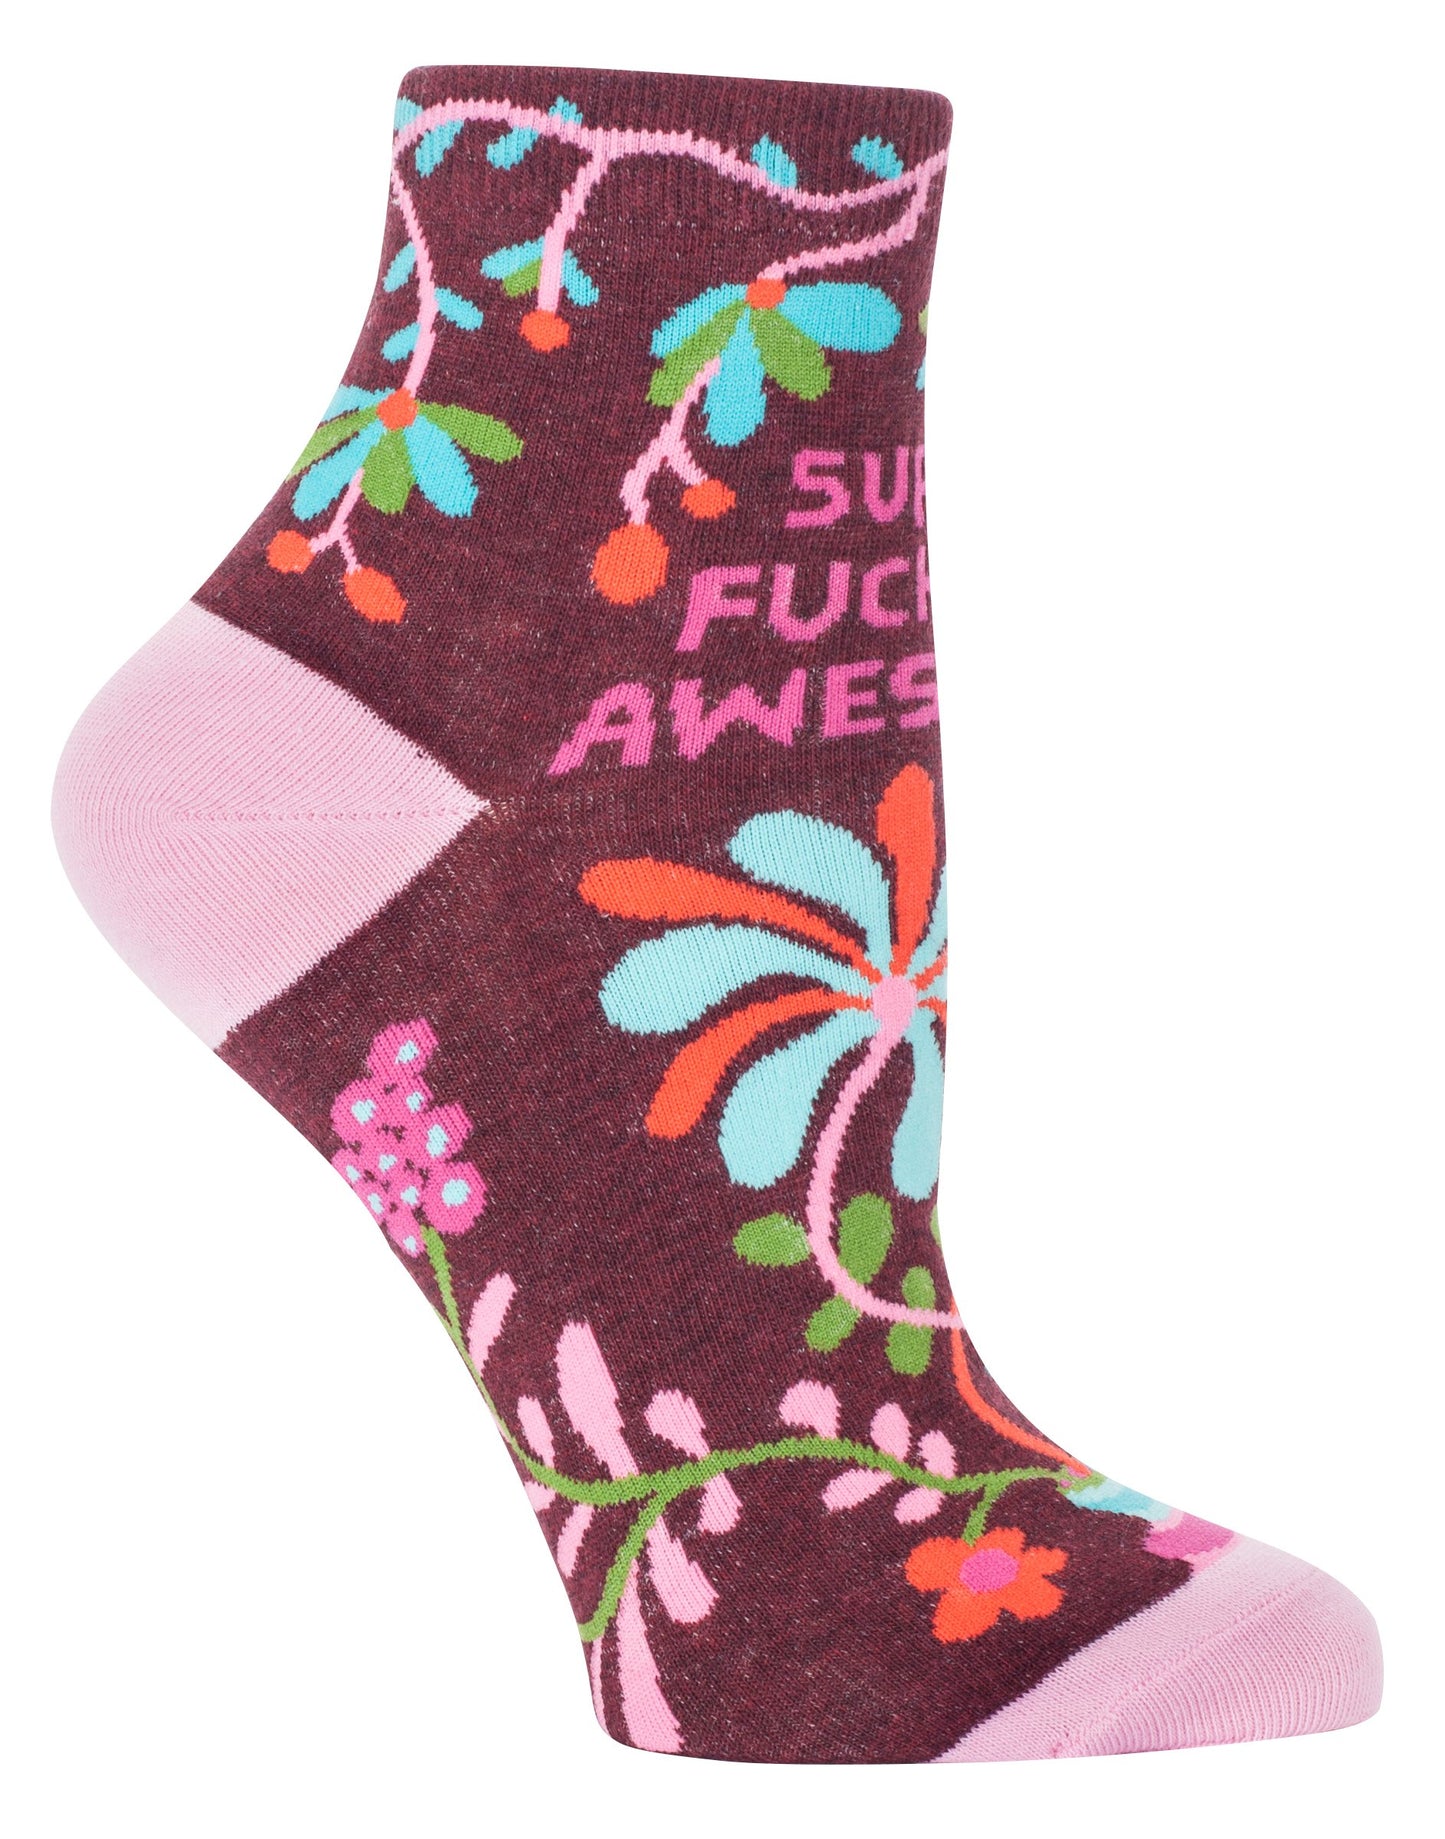 Blue Q - Women's Ankle Socks - Super Fxxking Awesome